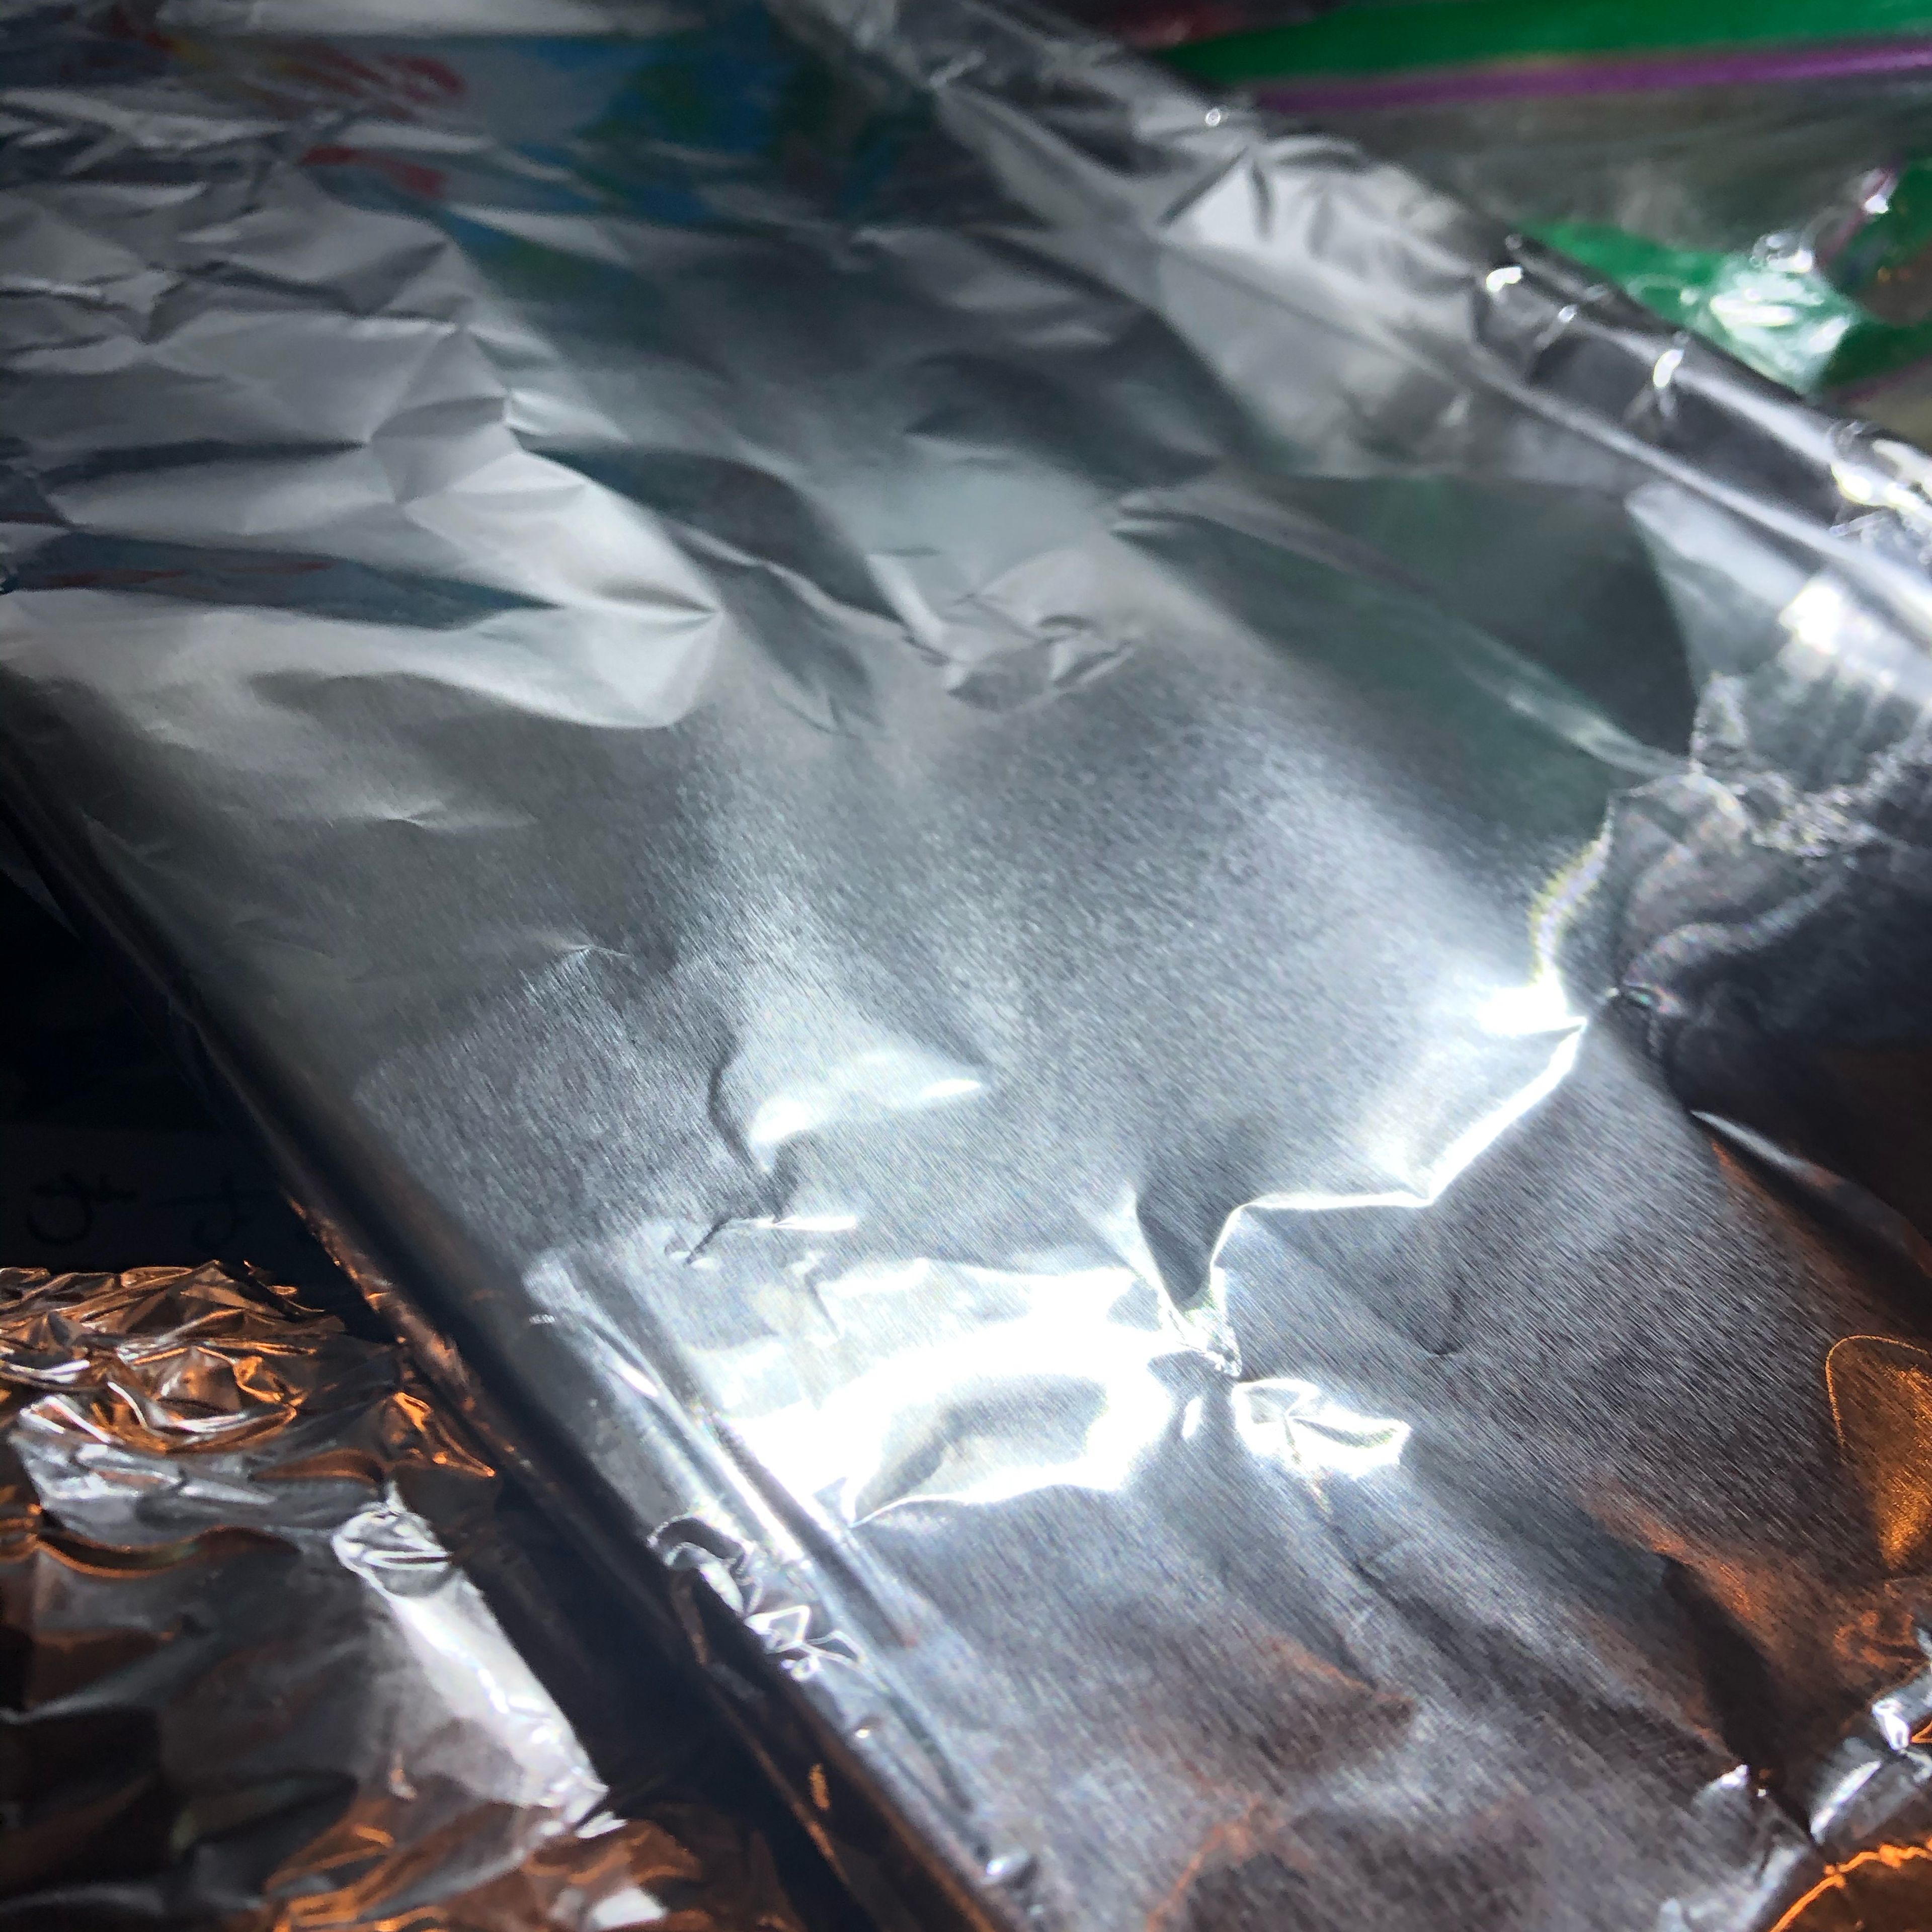 Cover tray in tinfoil and put it in the freezer for at least 2 hours.